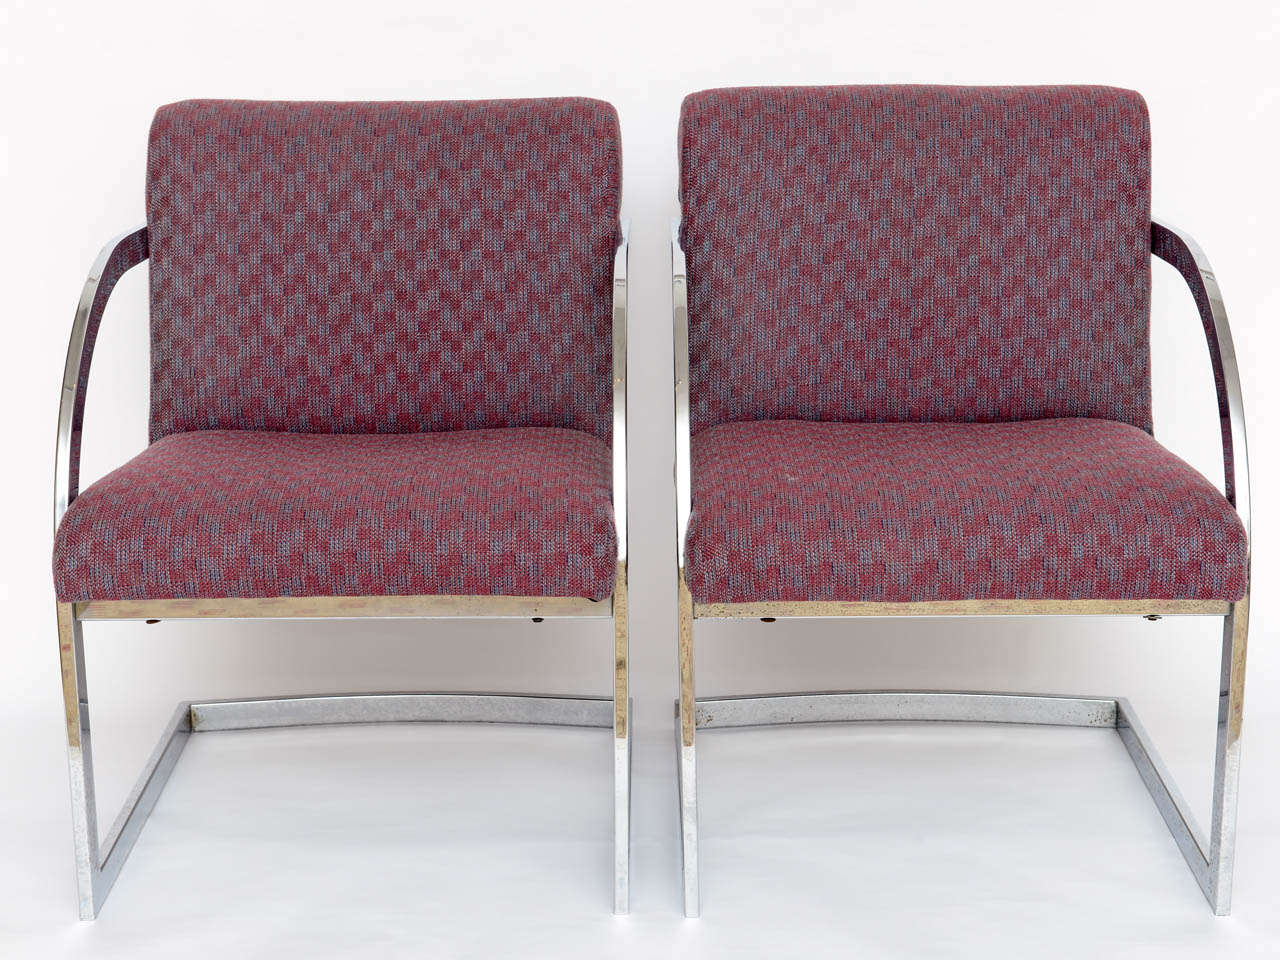 Beautiful pair of chrome and fabric Milo Baughman chairs from the late 60s